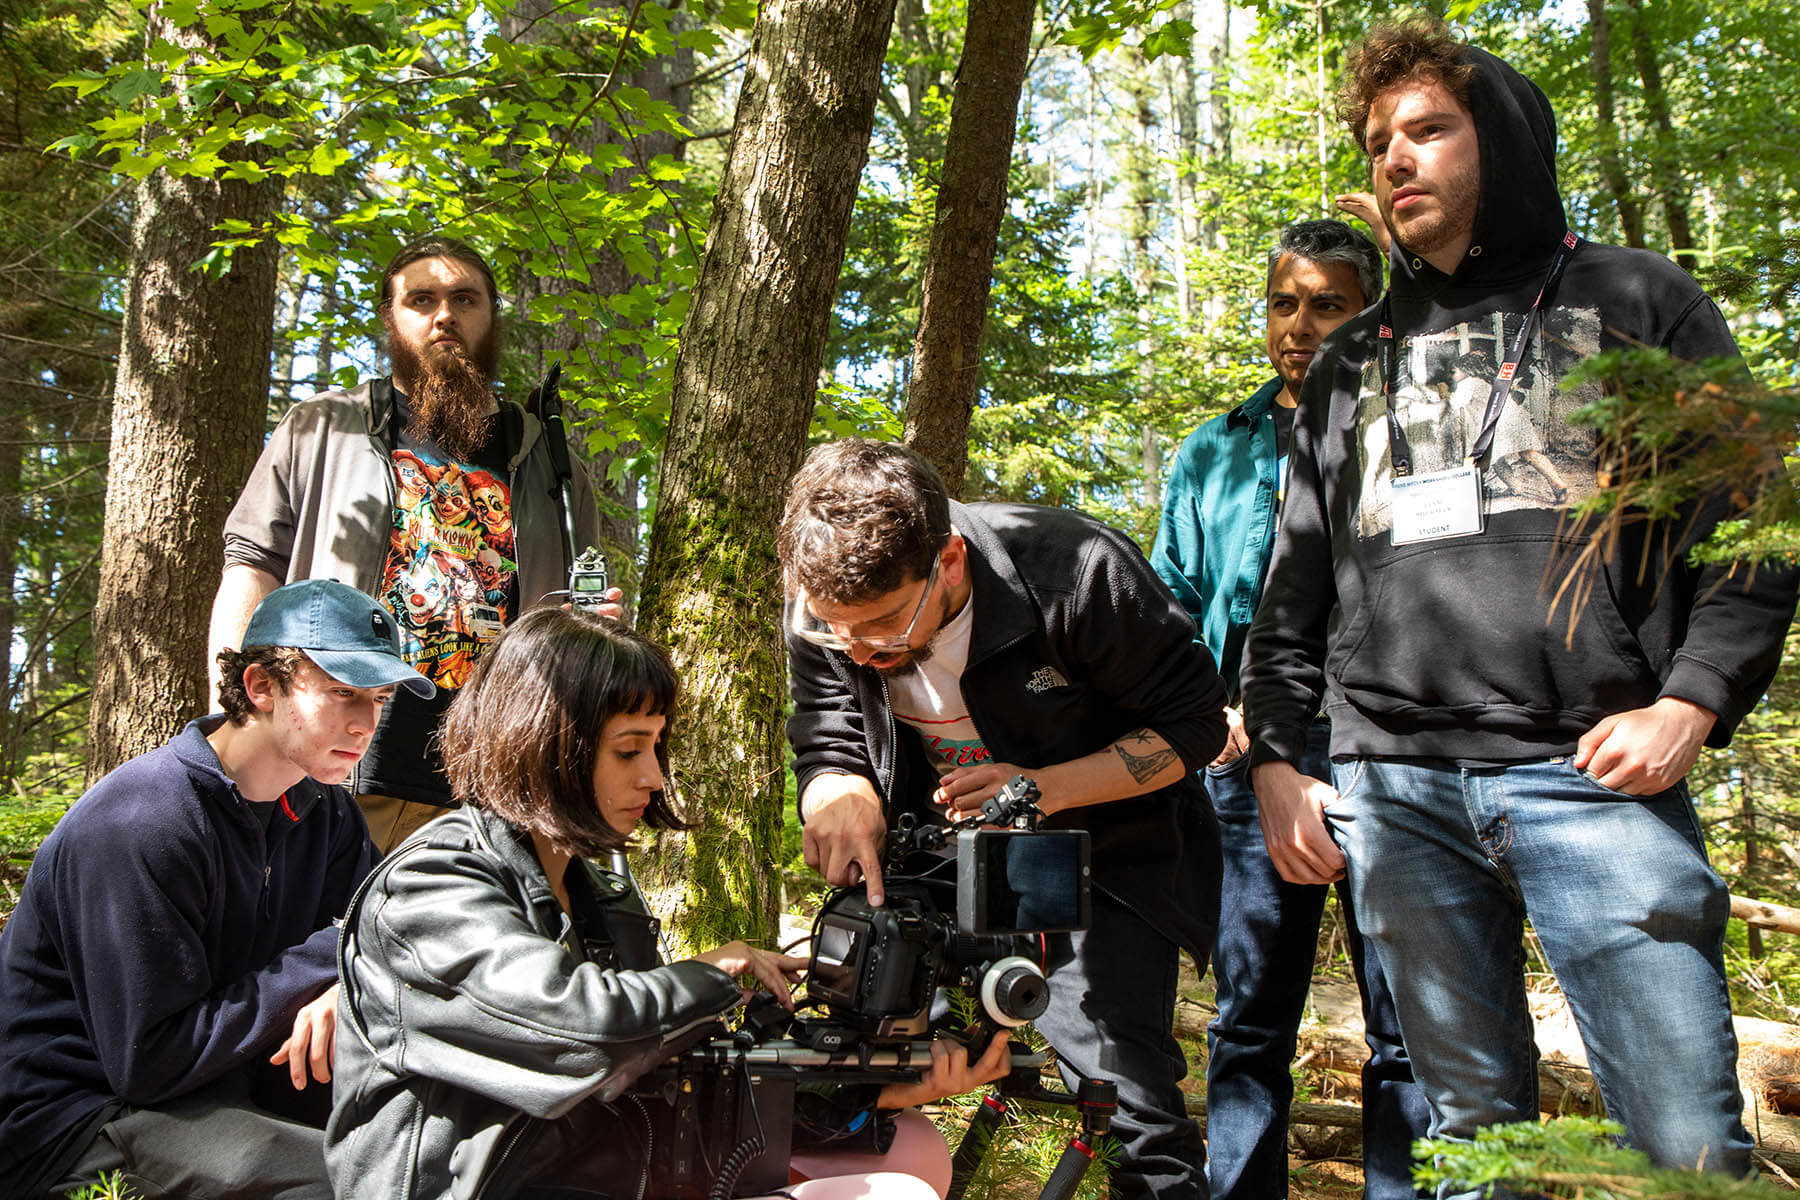 Students learning cinematography at Maine Media